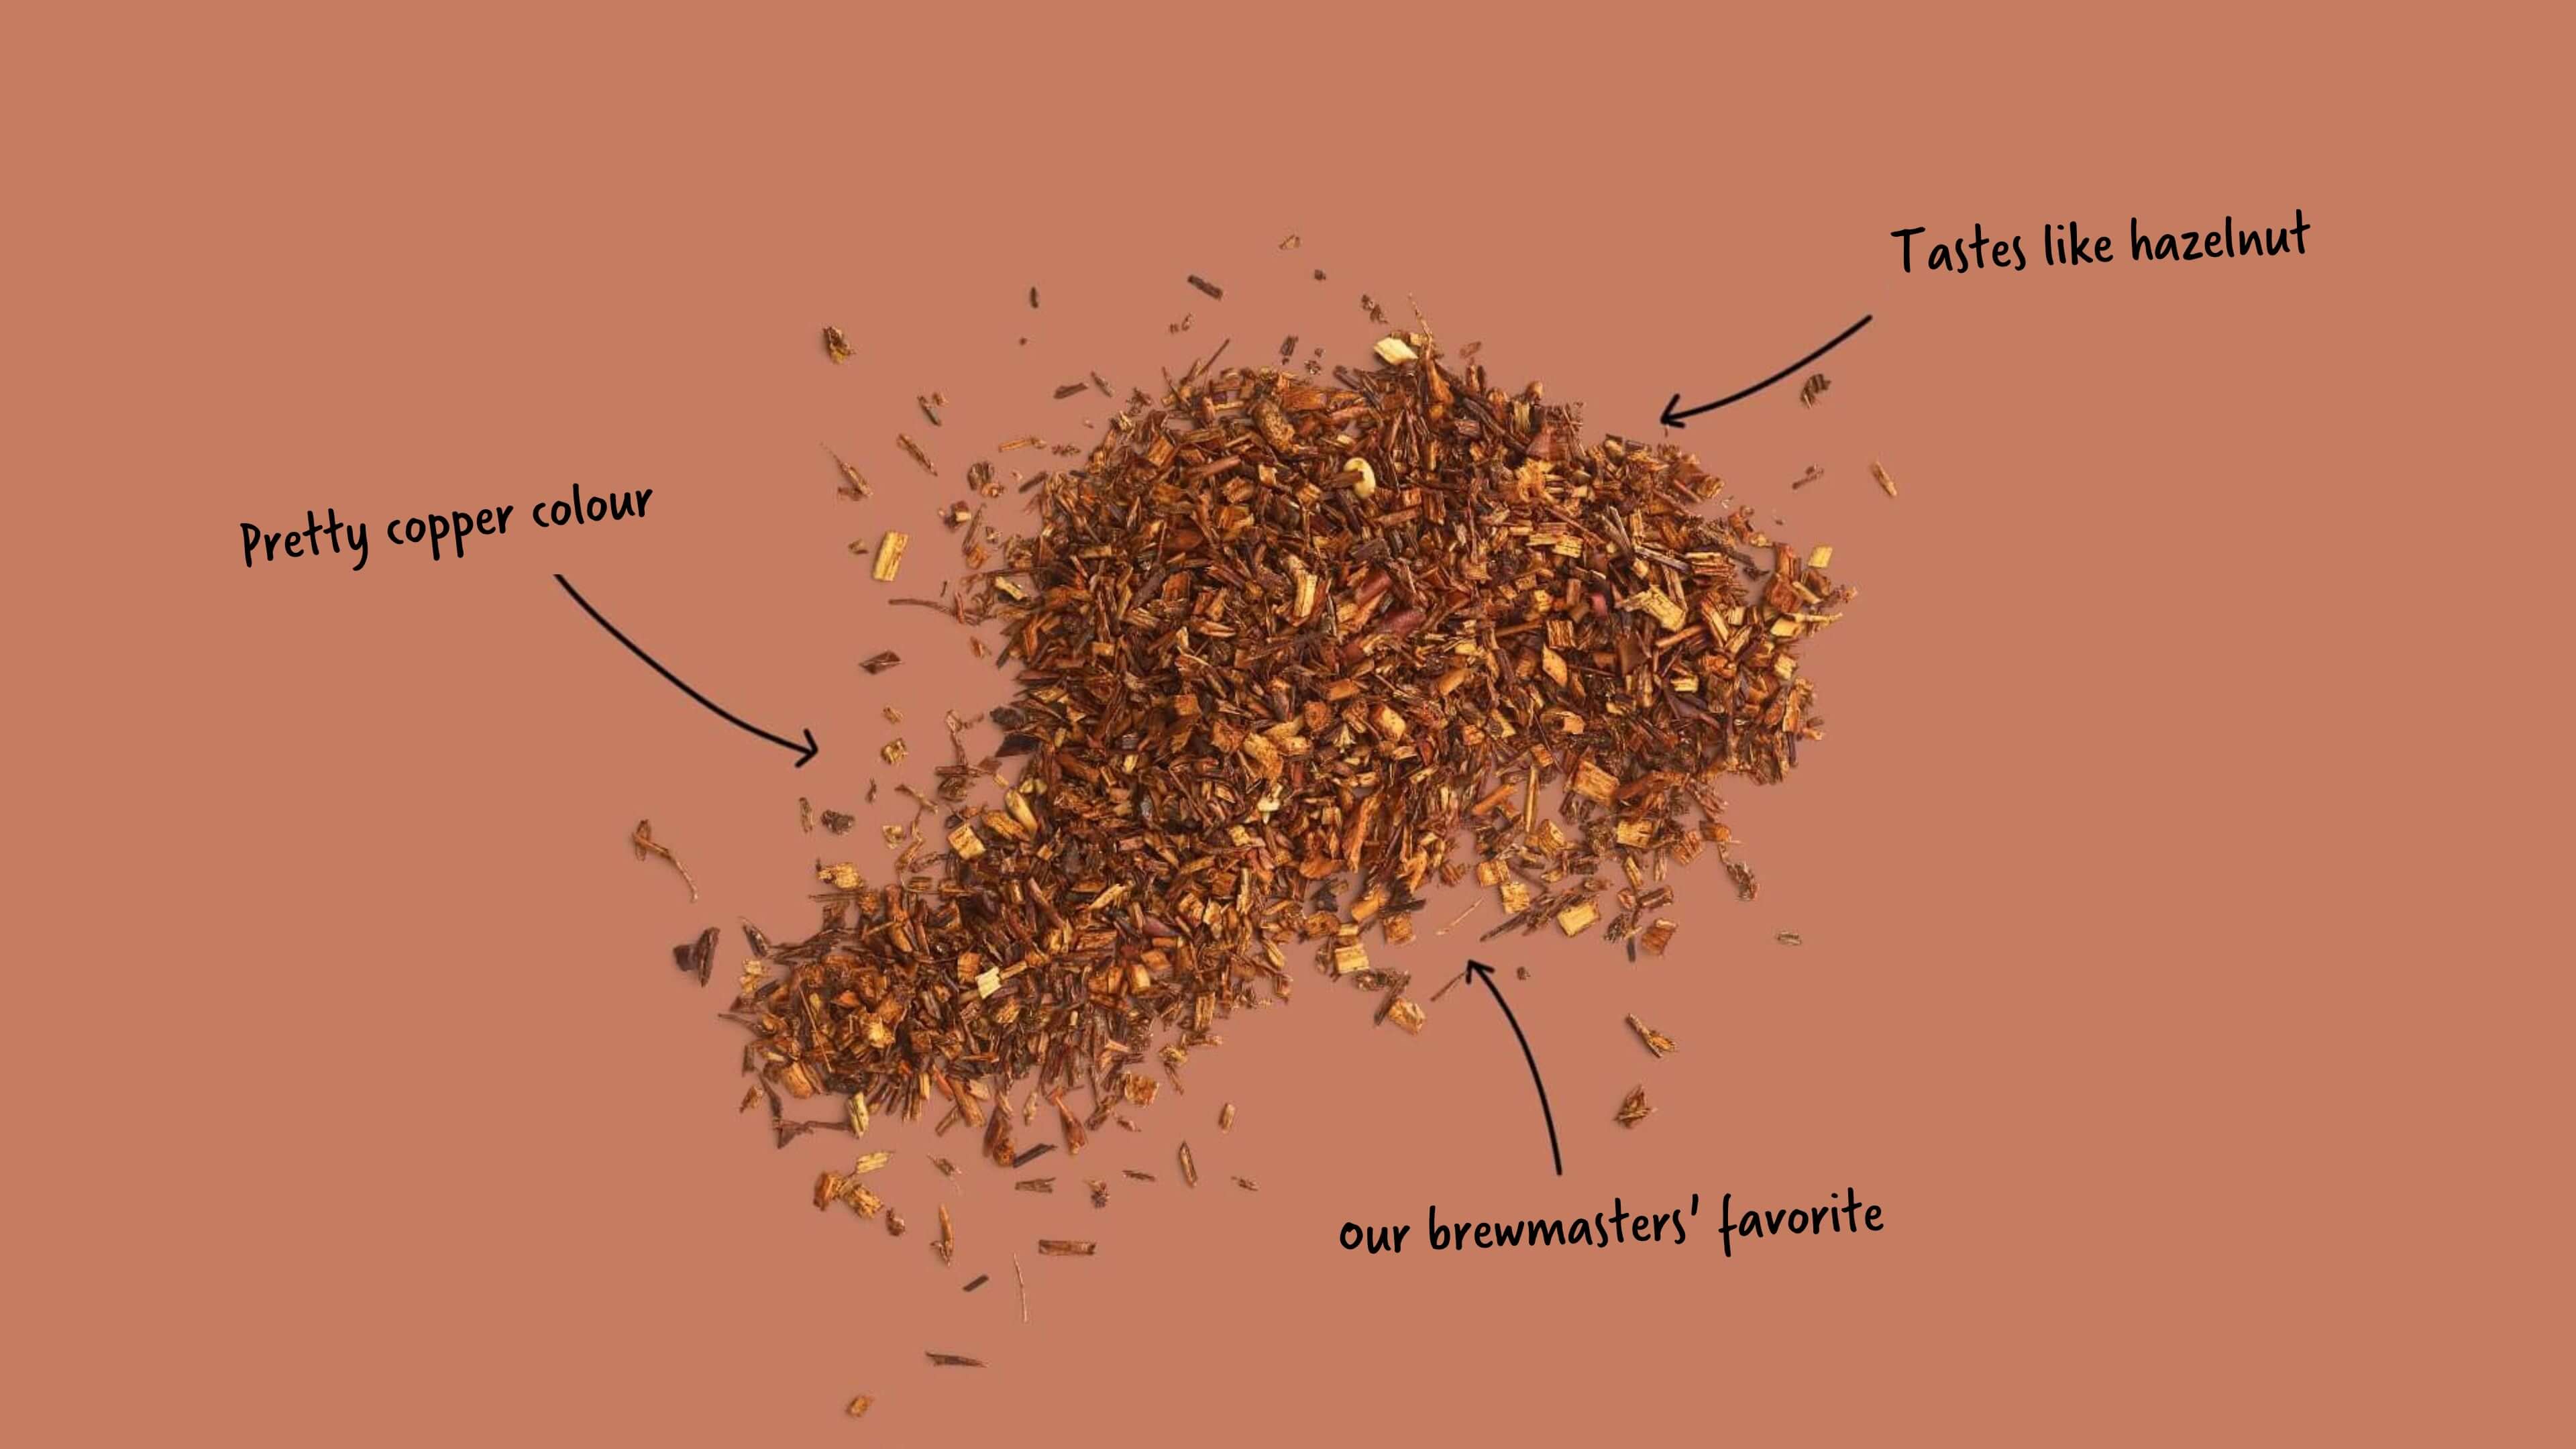 Dried rooibos is not a tea, but is used in herbal blends